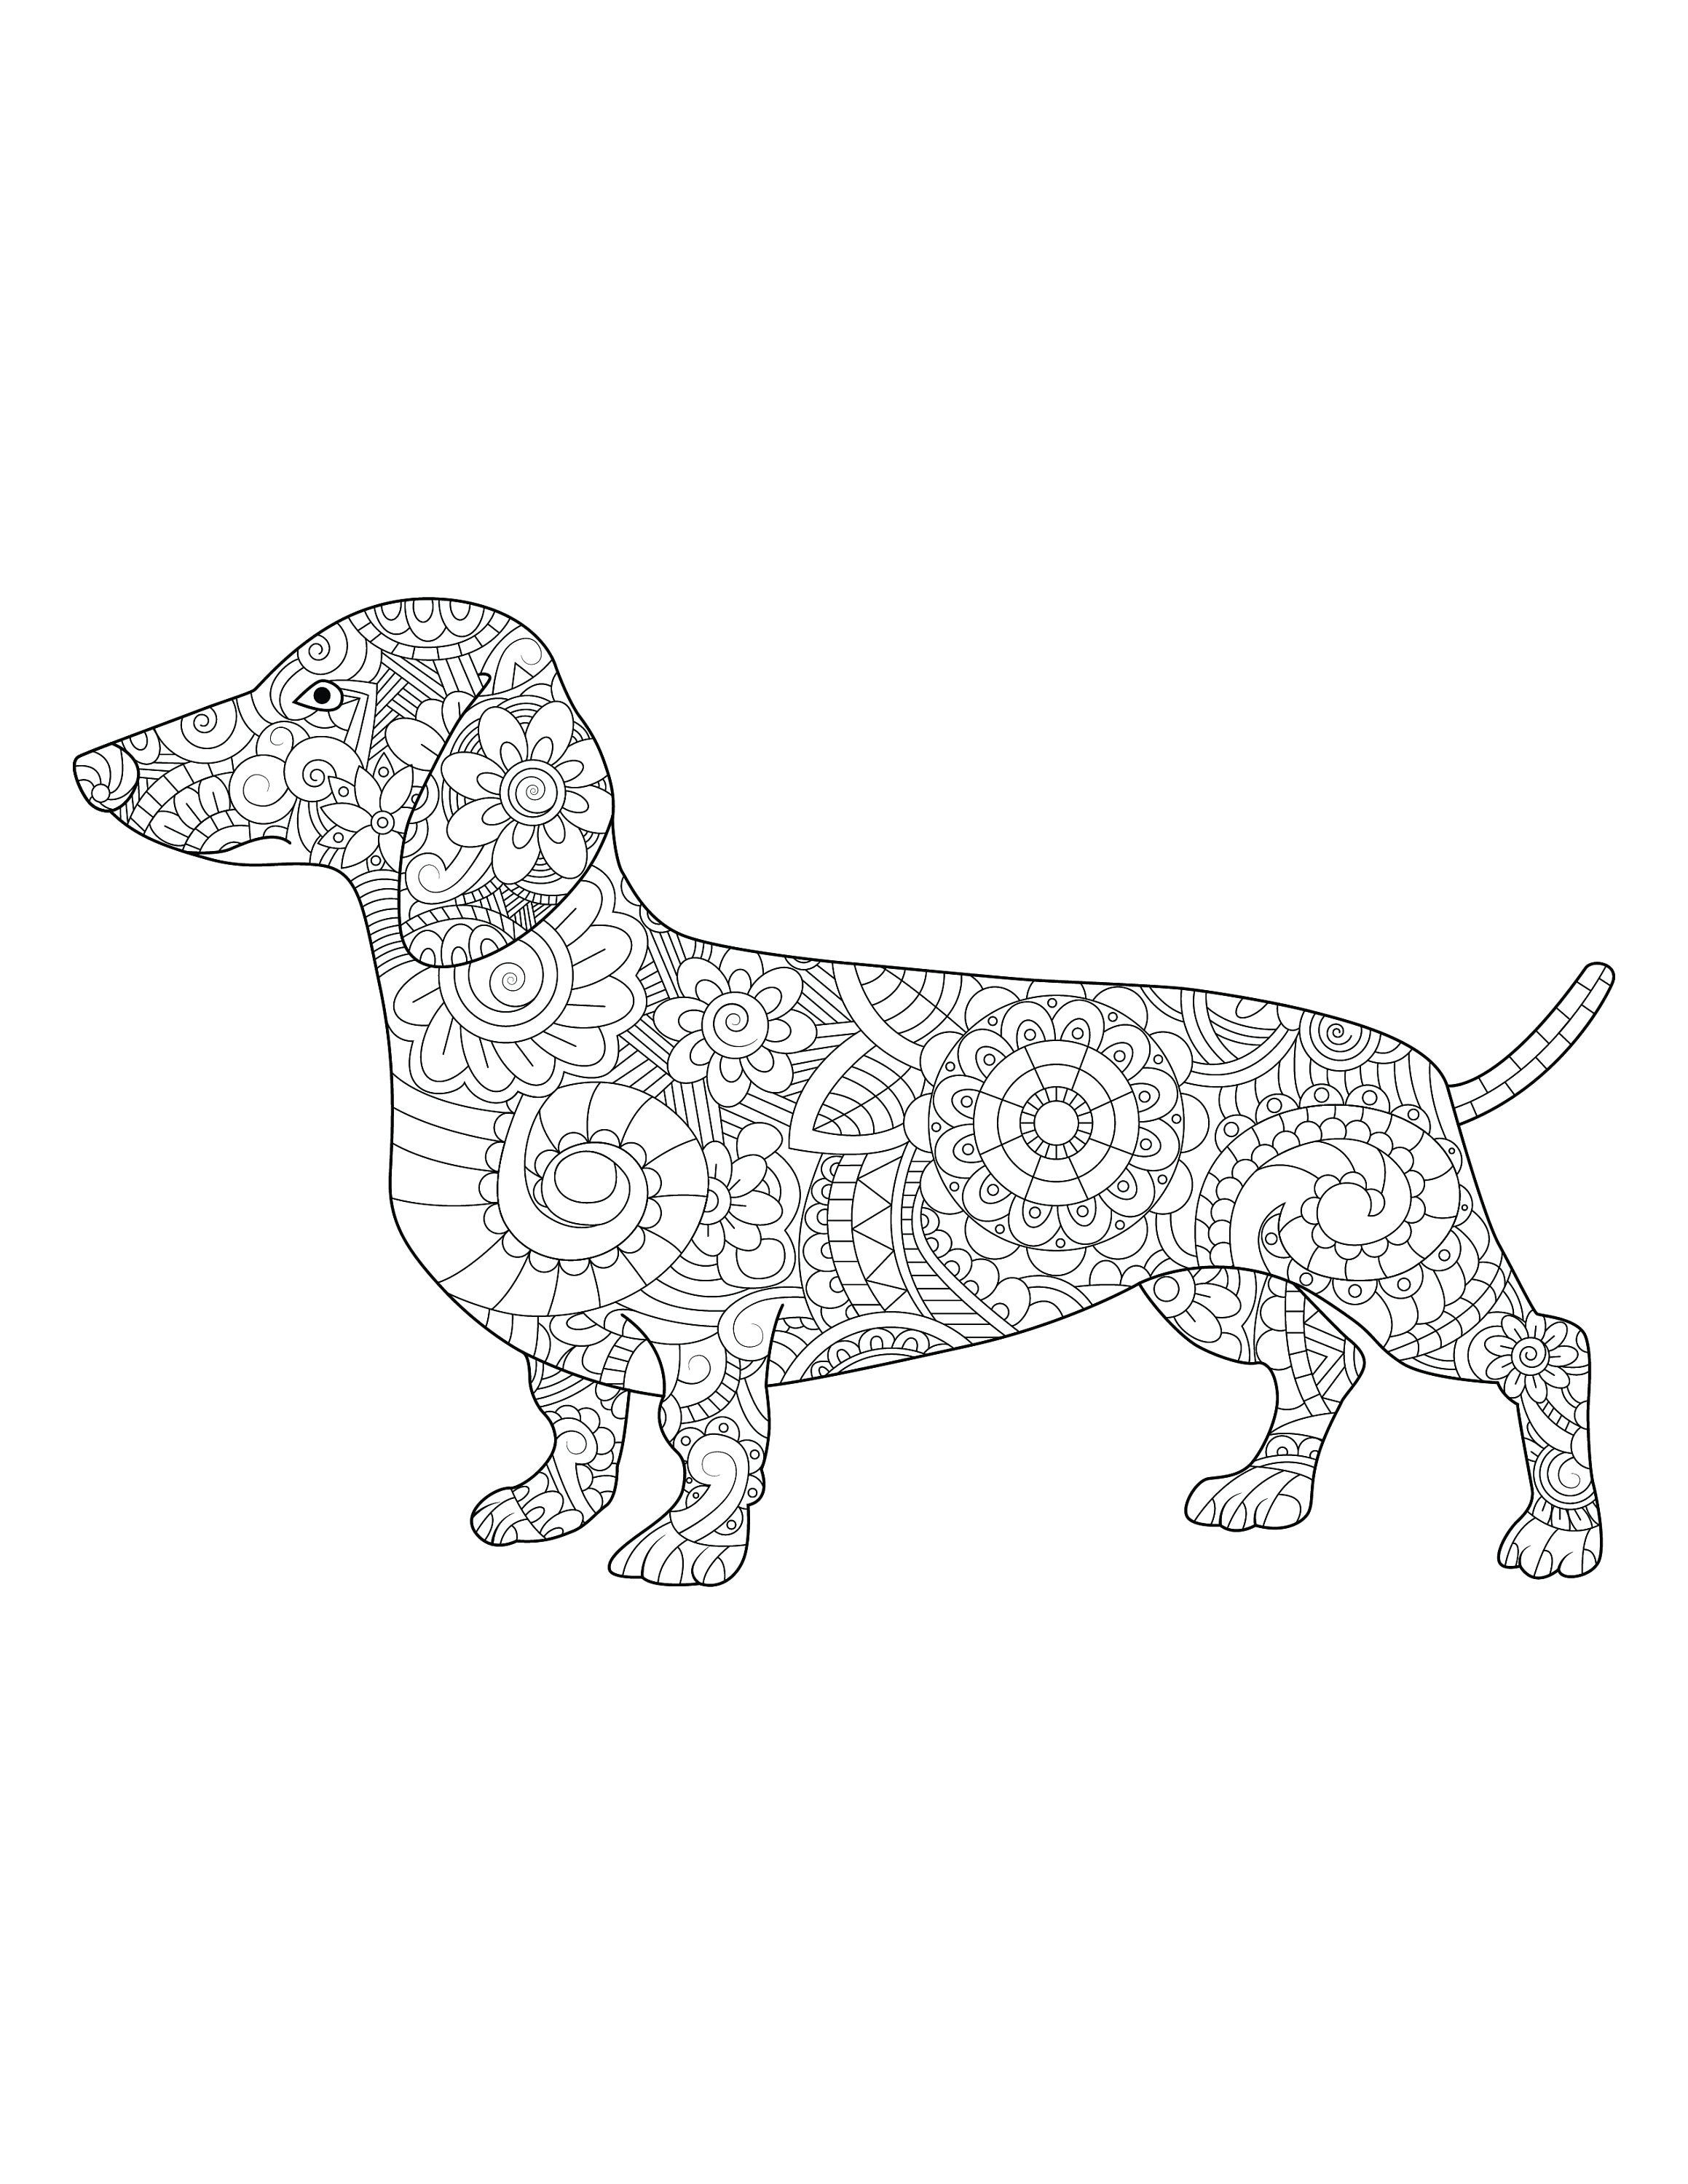 Dachshund Dog Coloring Page/ Zen Coloring/ Digital - Etsy